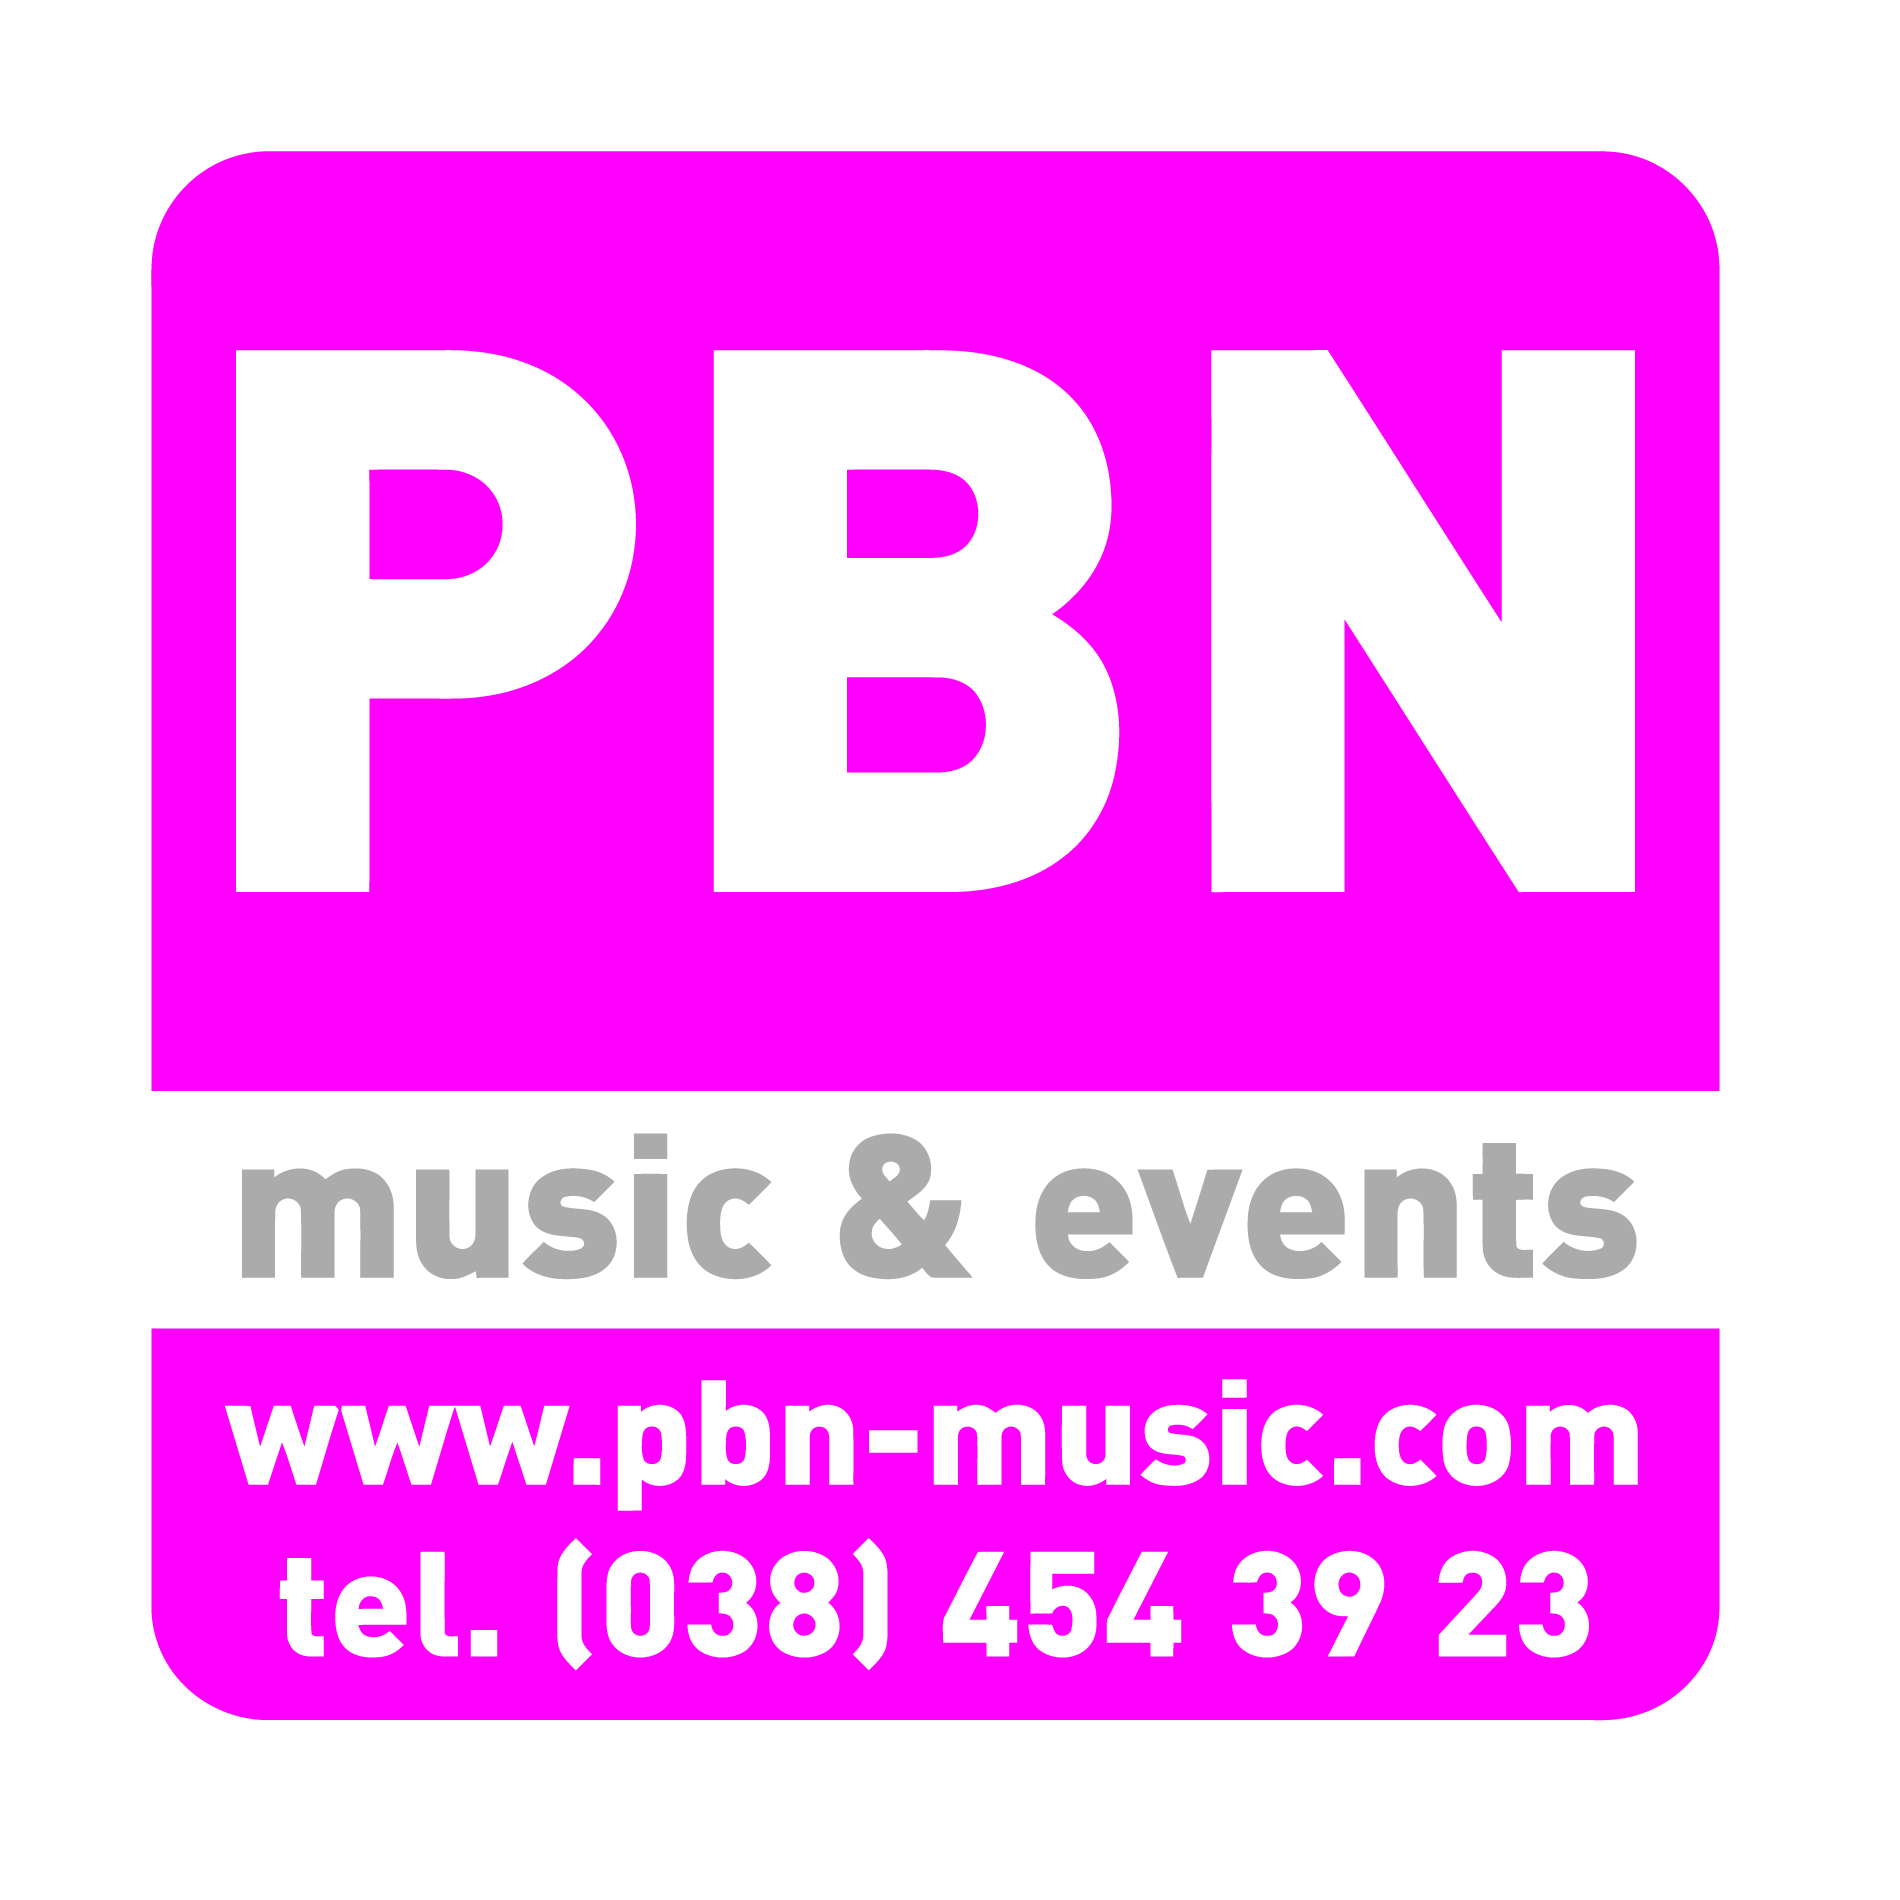 PBN-music & events